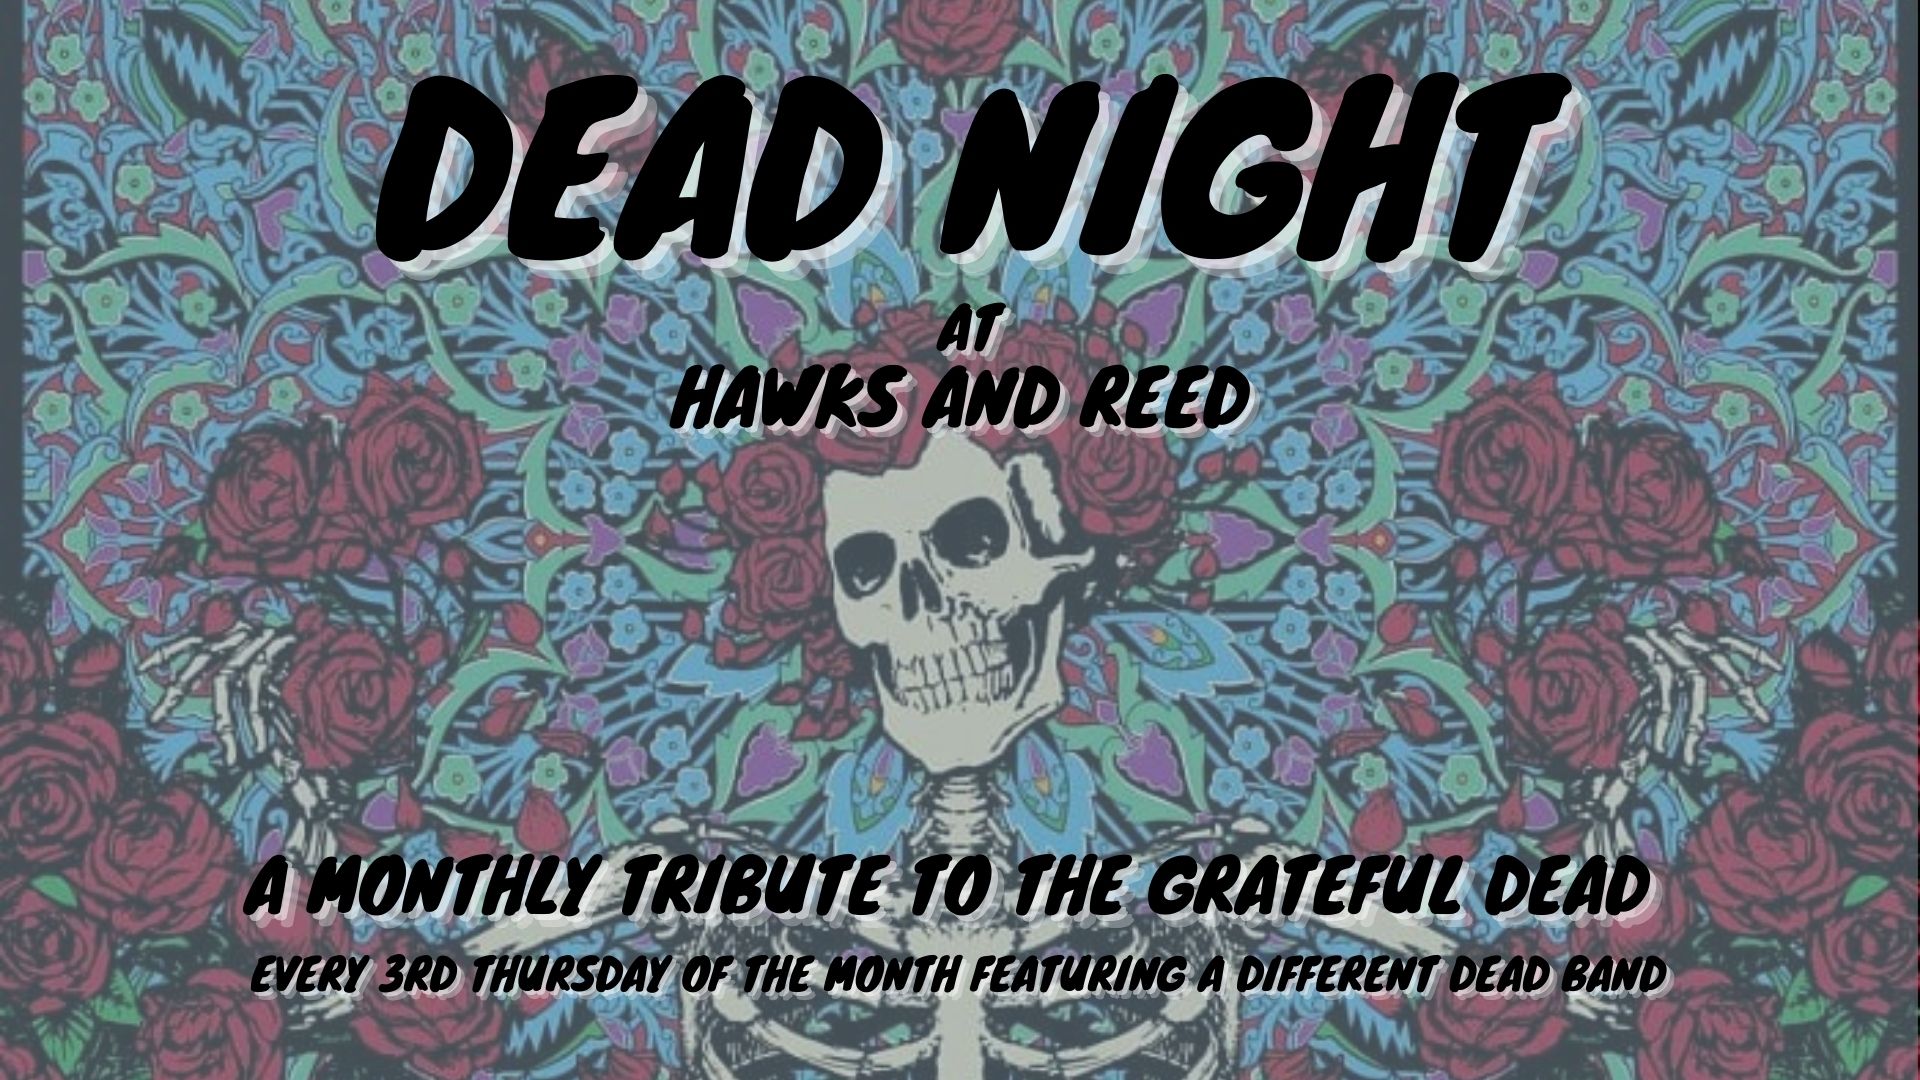 DEAD NIGHT AT HAWKS AND REED – A MONTHLY TRIBUTE TO THE GRATEFUL DEAD